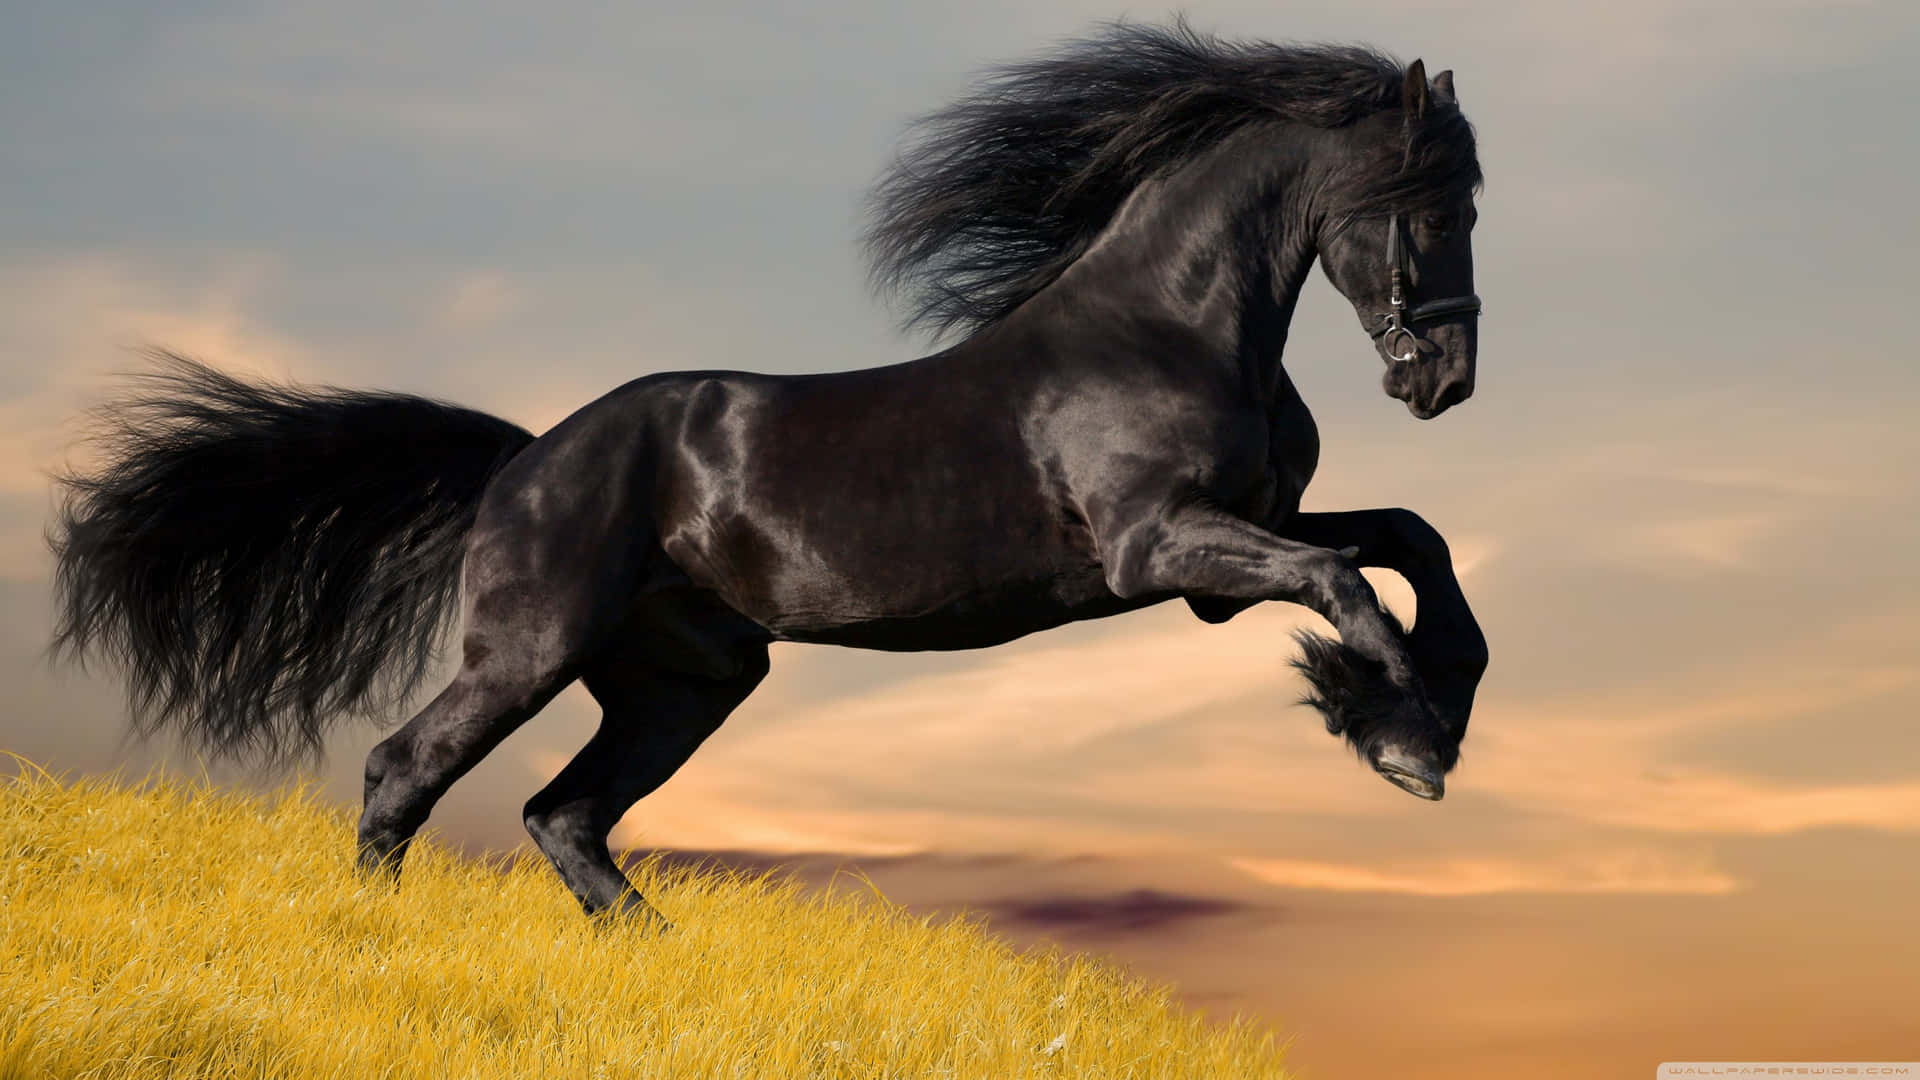 Beauty of The Wild - Pretty Horse